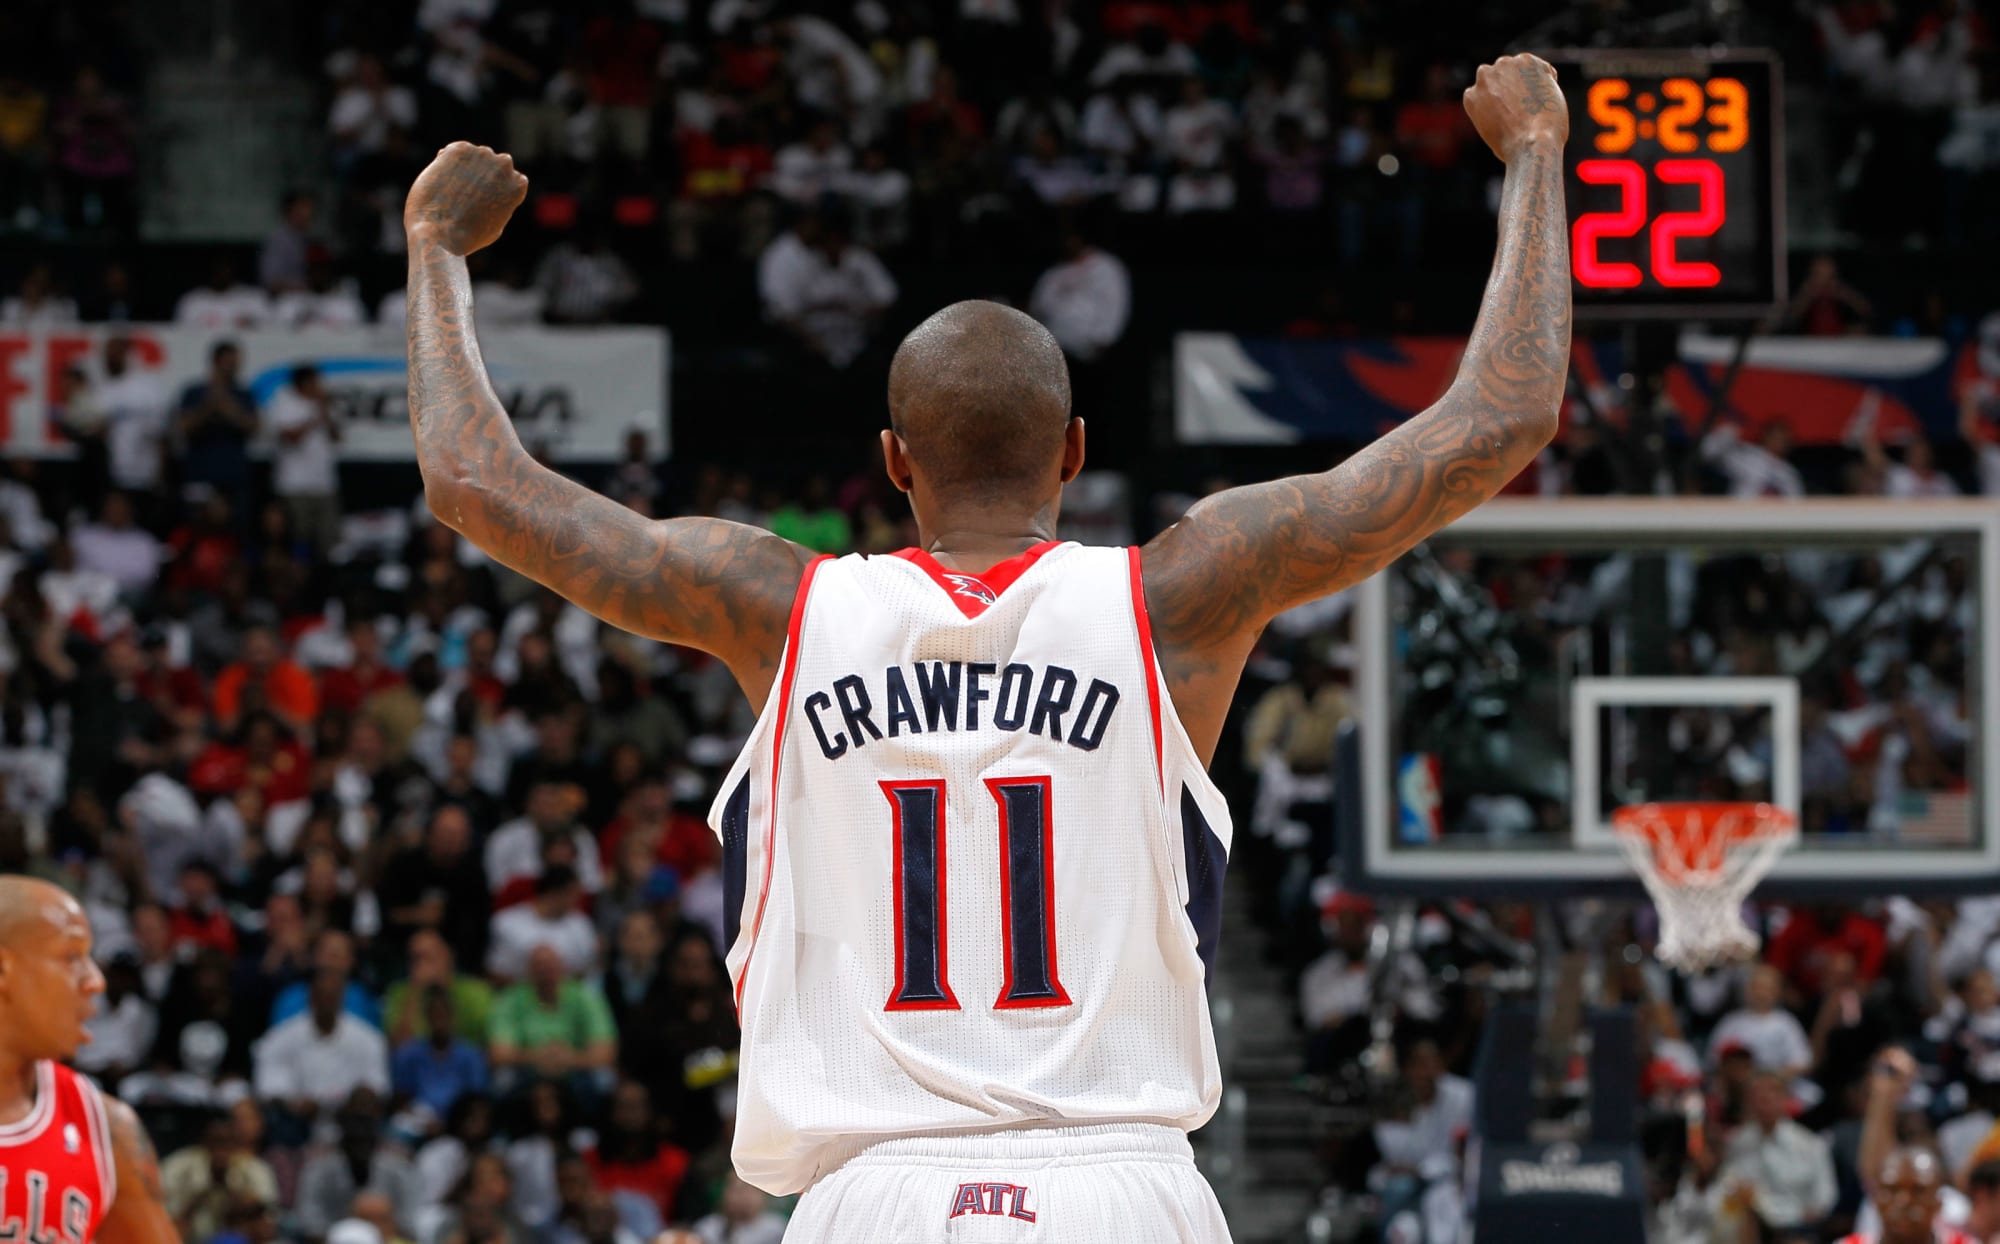 Report: Jamal Crawford signs with Brooklyn Nets ahead of NBA